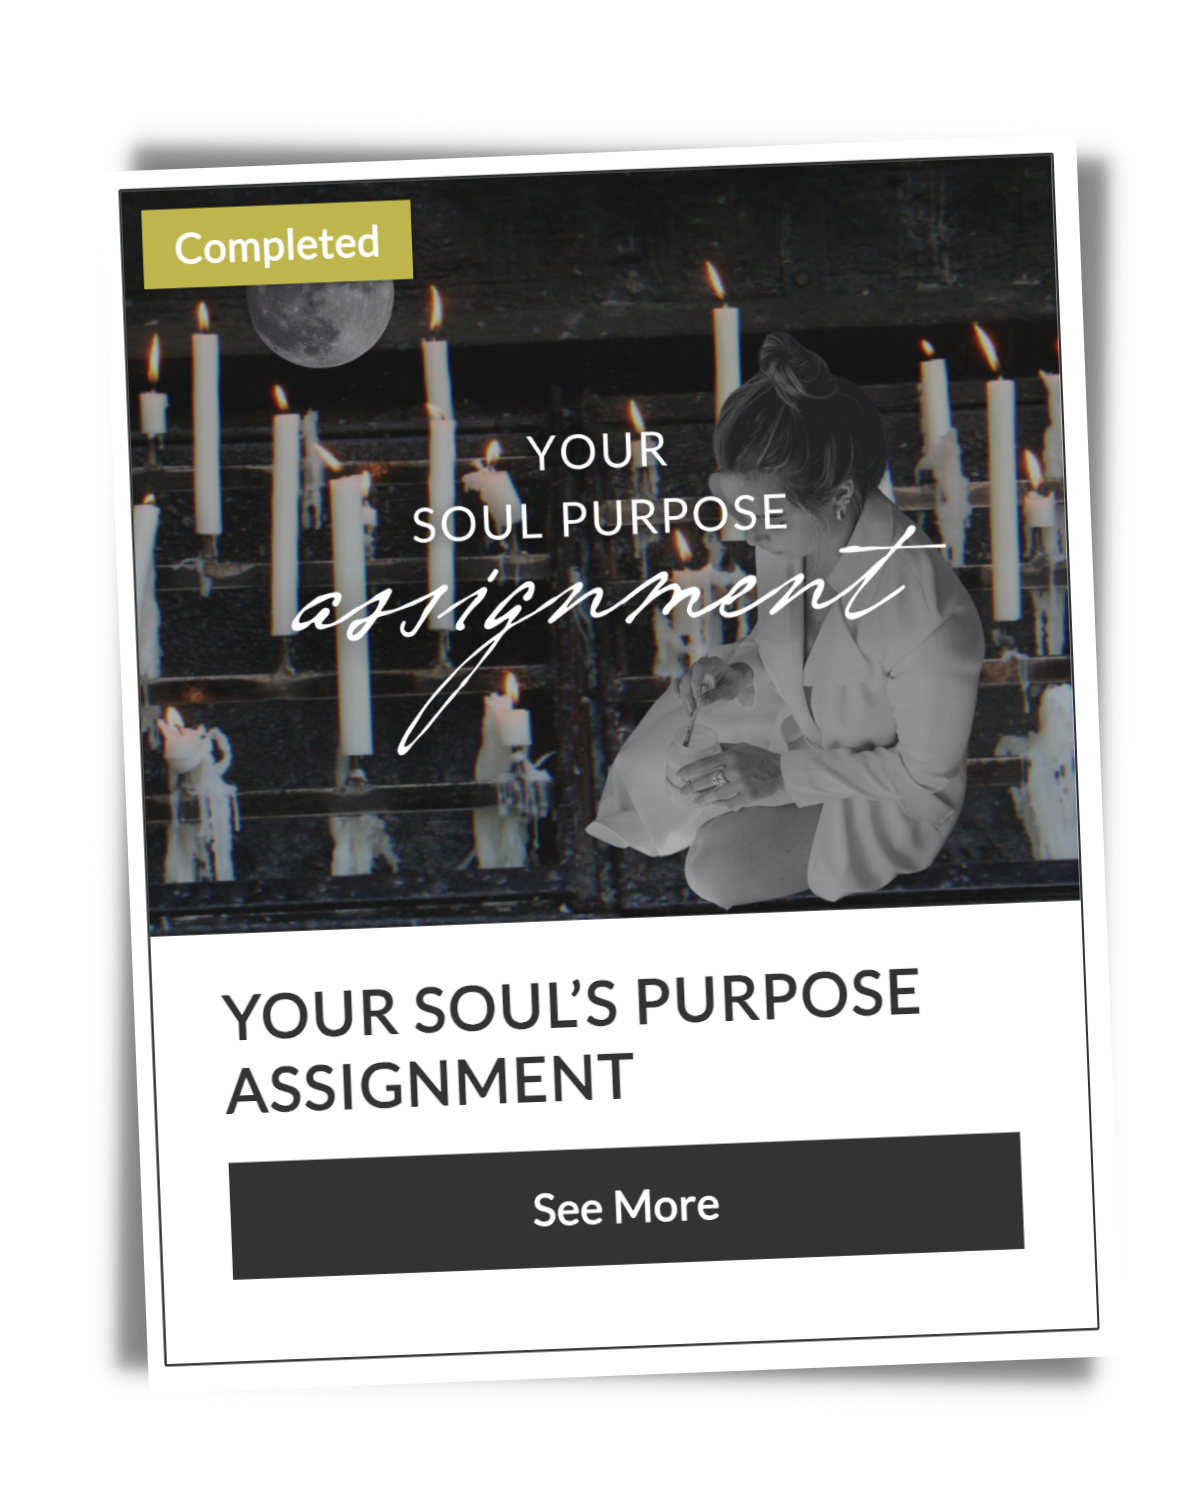 The Space: Your Soul's Purpose Assignment